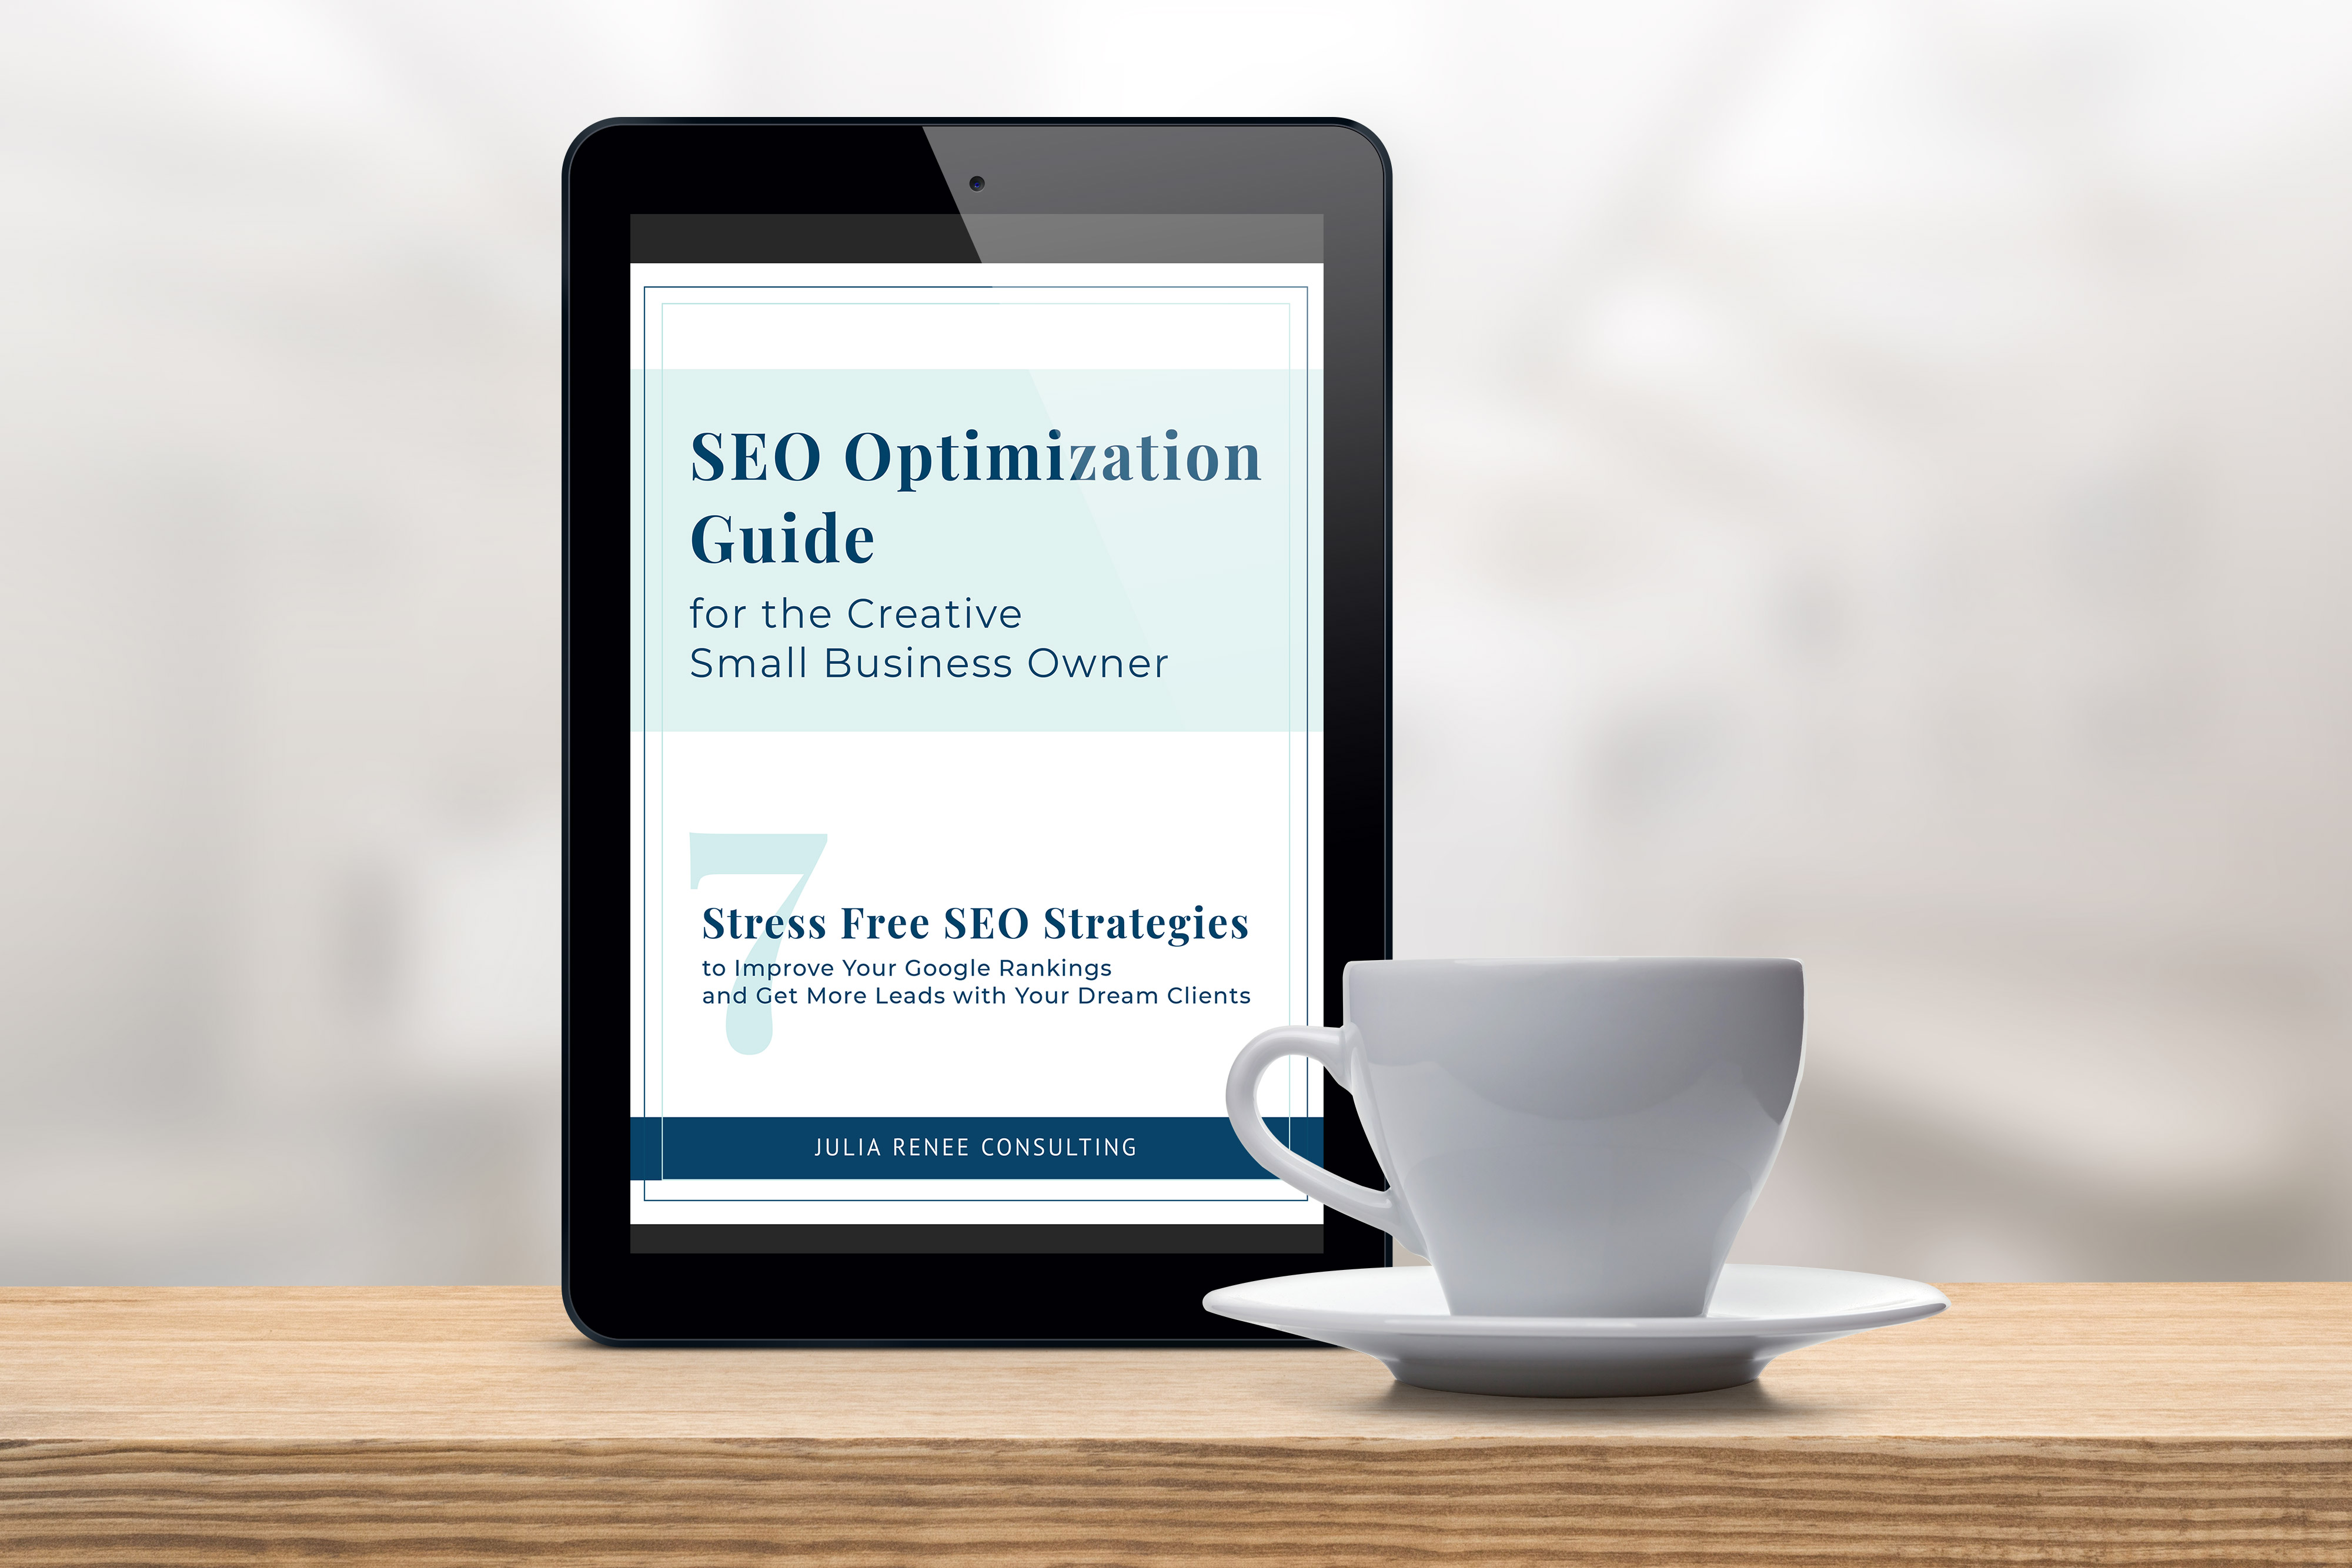 SEO Optimization Guide for the Creative Small Business Owner: 7 Stress Free SEO Strategies to Improve Your Google Rankings and Get More Leads with Your Dream Clients